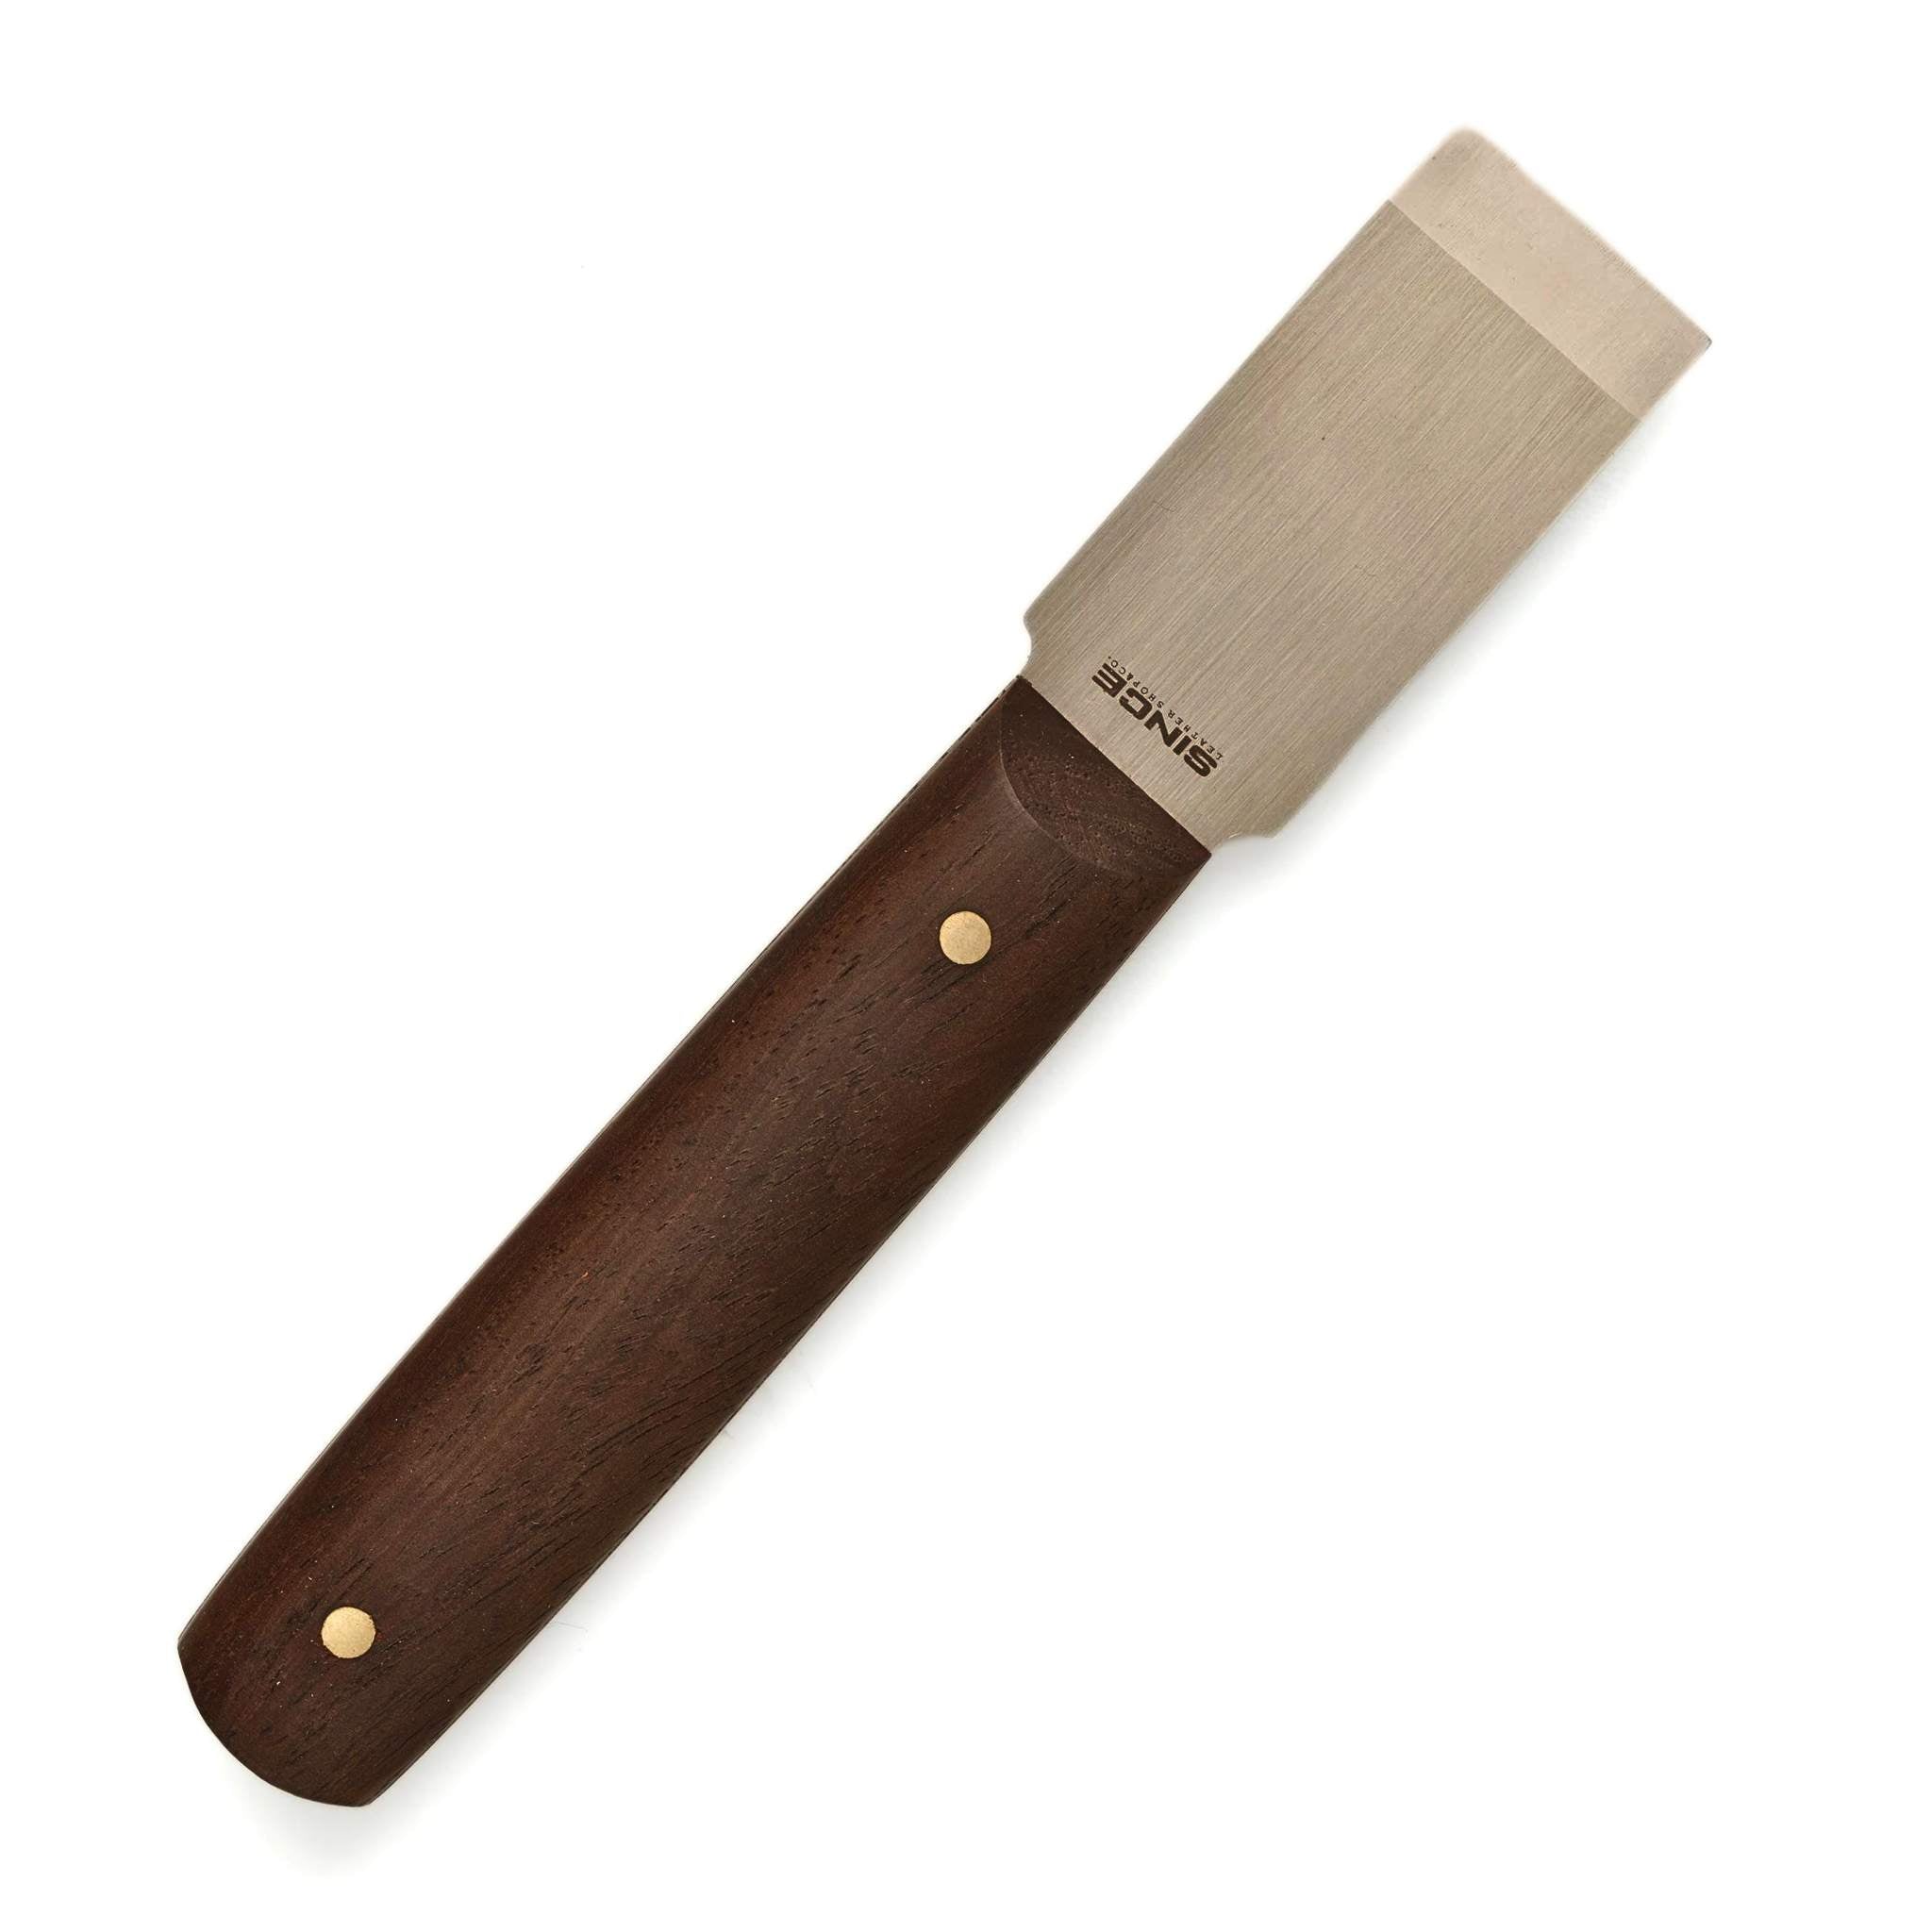 Cut, skive, and trim leather with this high-quality, hardened stainless steel blade that has been sharpened to a razor’s edge.